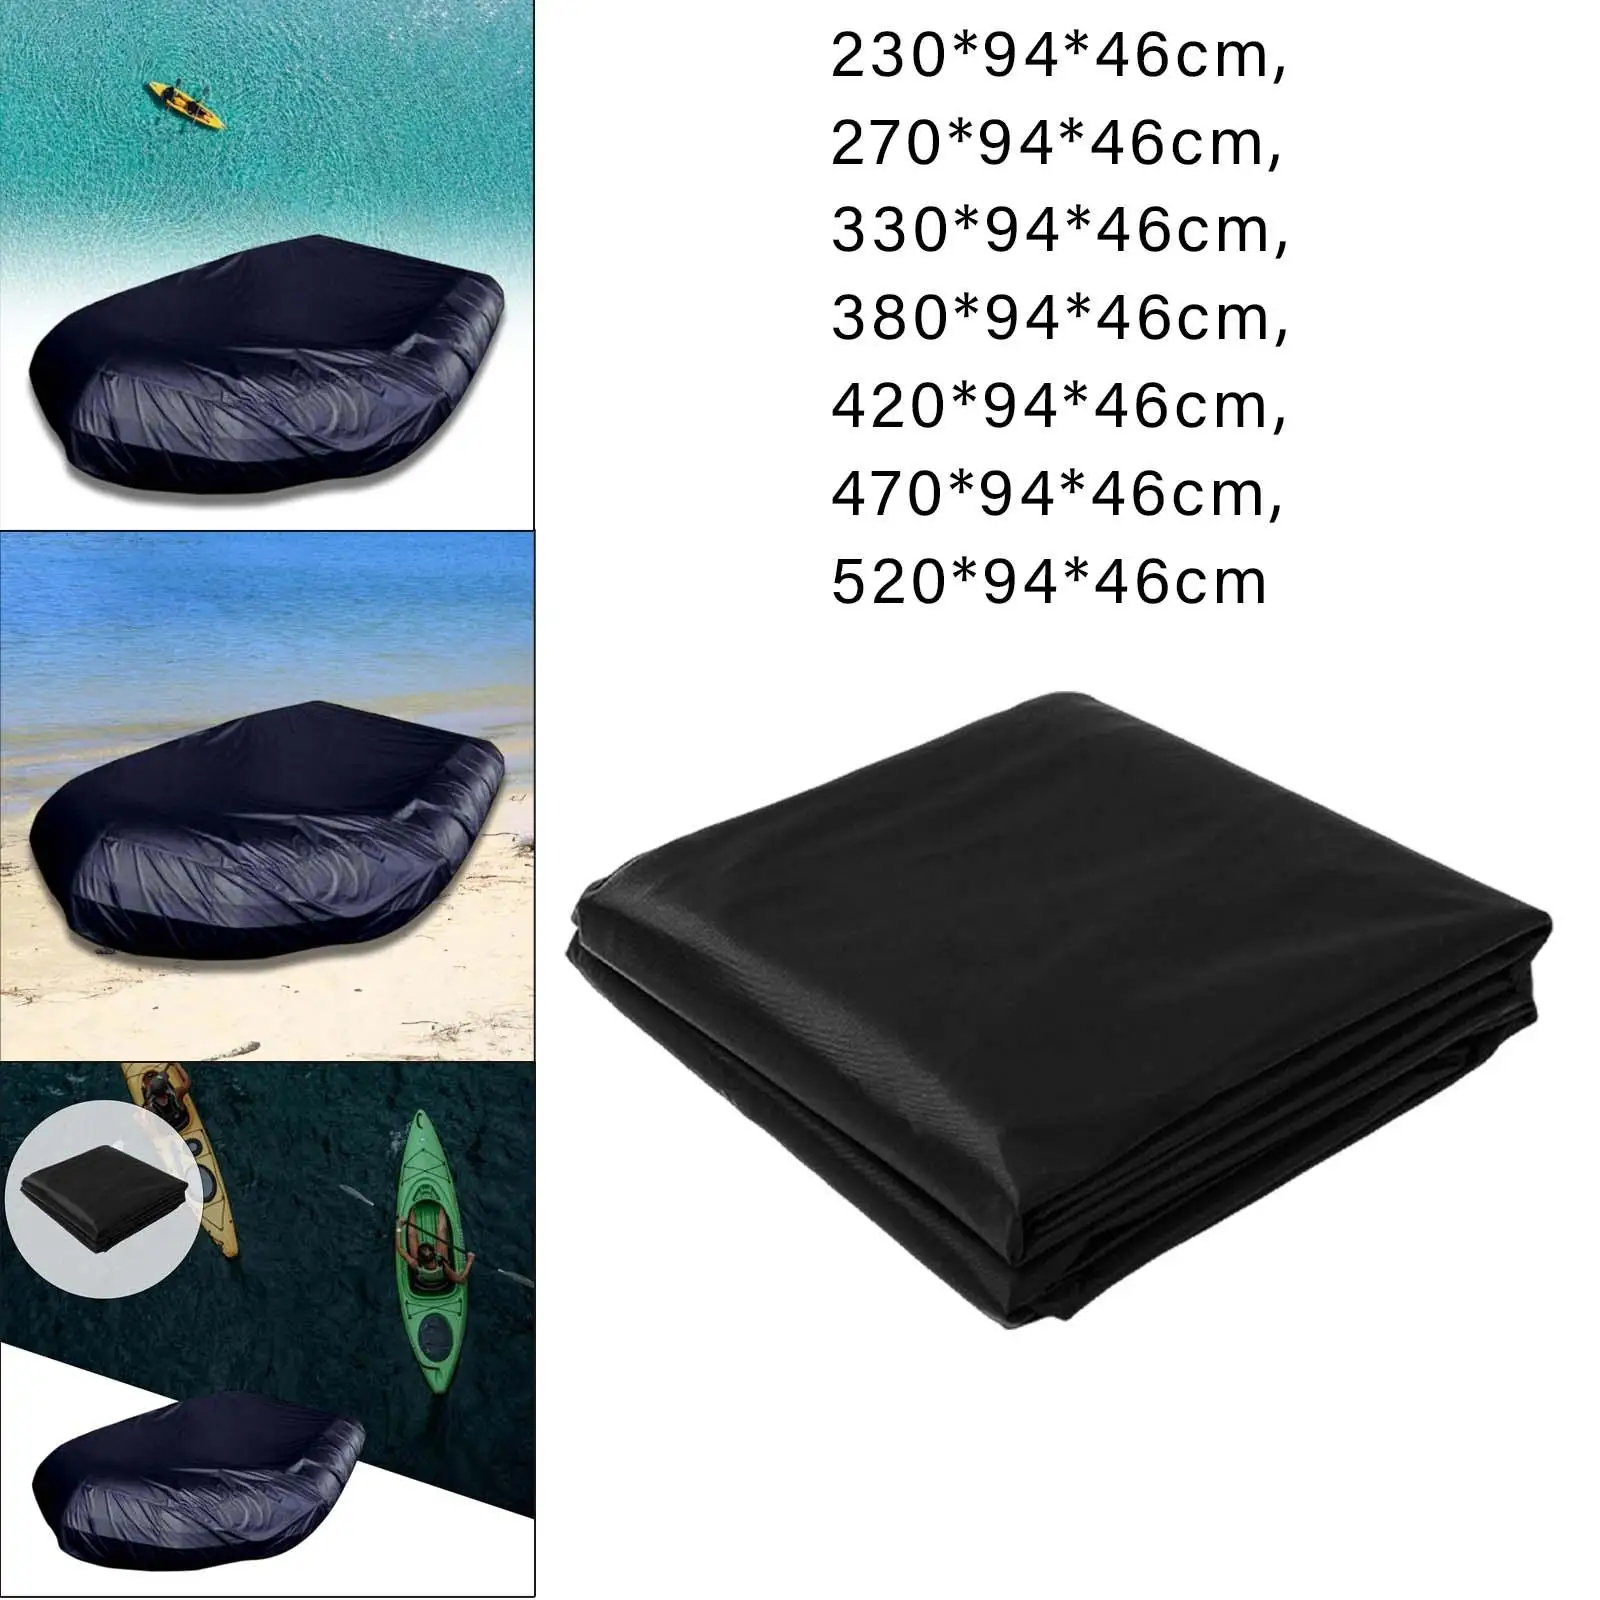 Oxford Kayak Boat Cover with Drawstring Outdoor Storage Protective Waterproof Canoe for Marine Dinghy Inflatable Boat